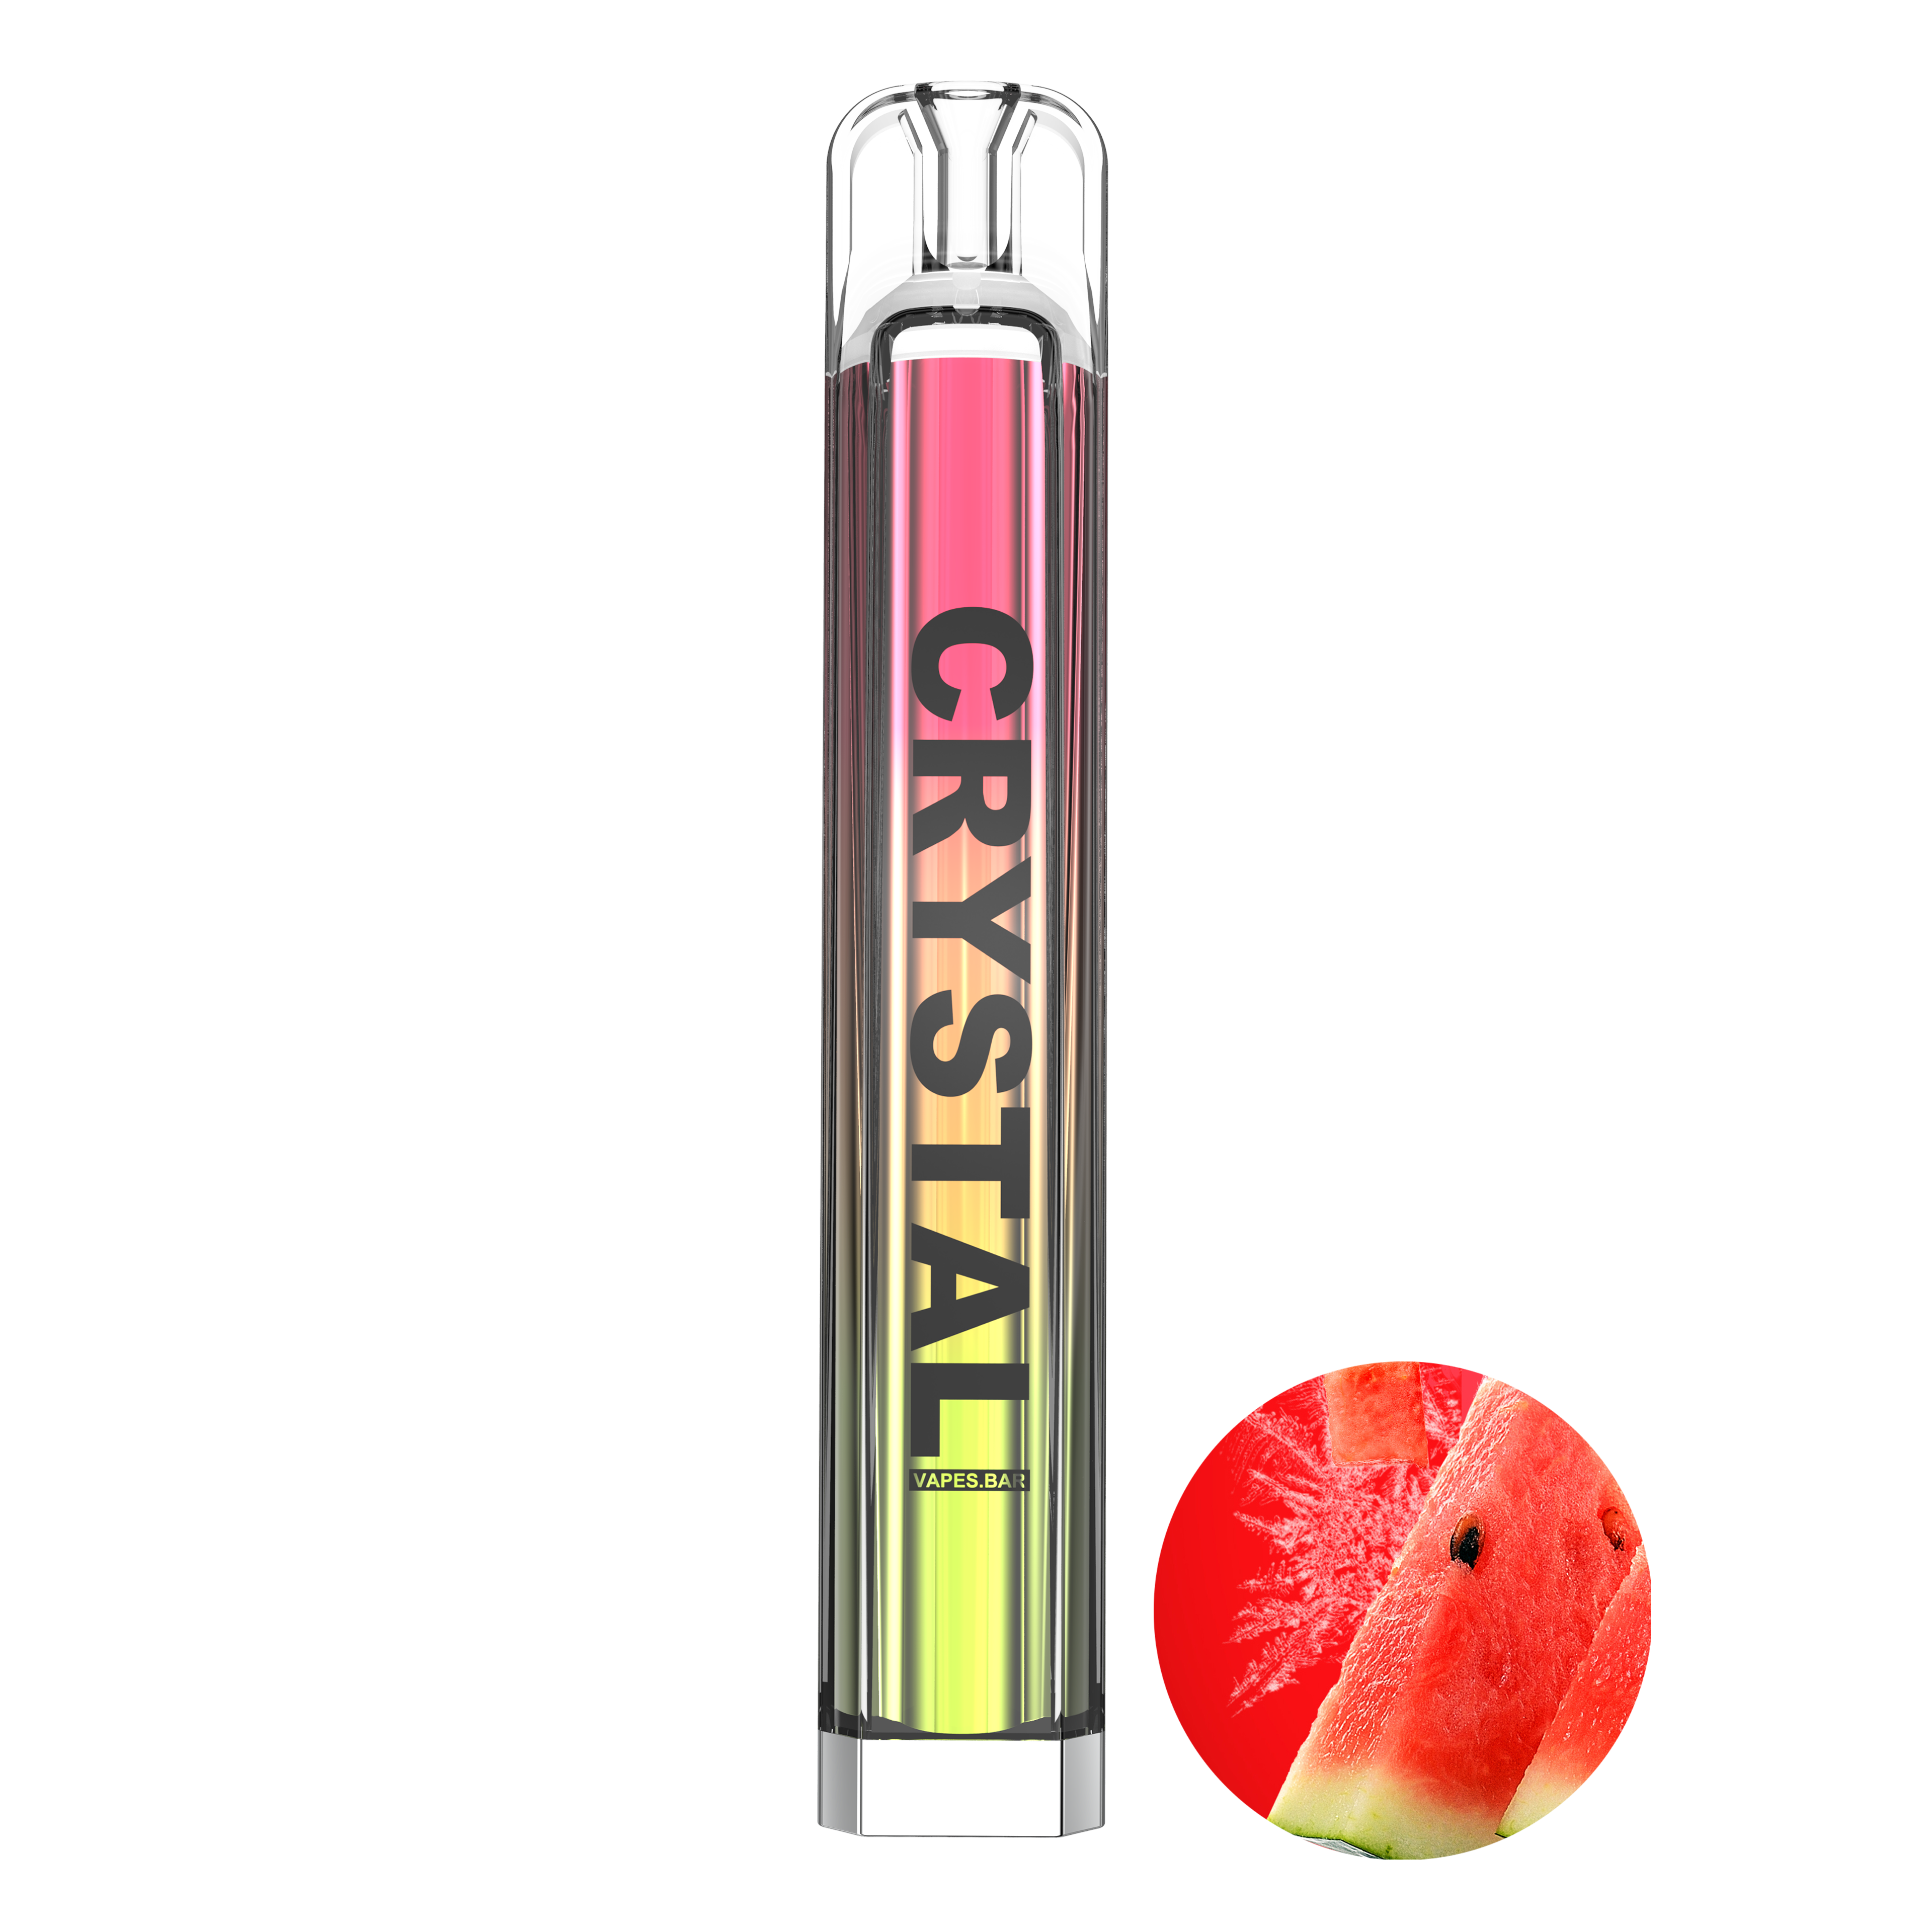 Watermelon Ice Crystal 600 Puffs Disposable Pod Device-VAPES.BAR